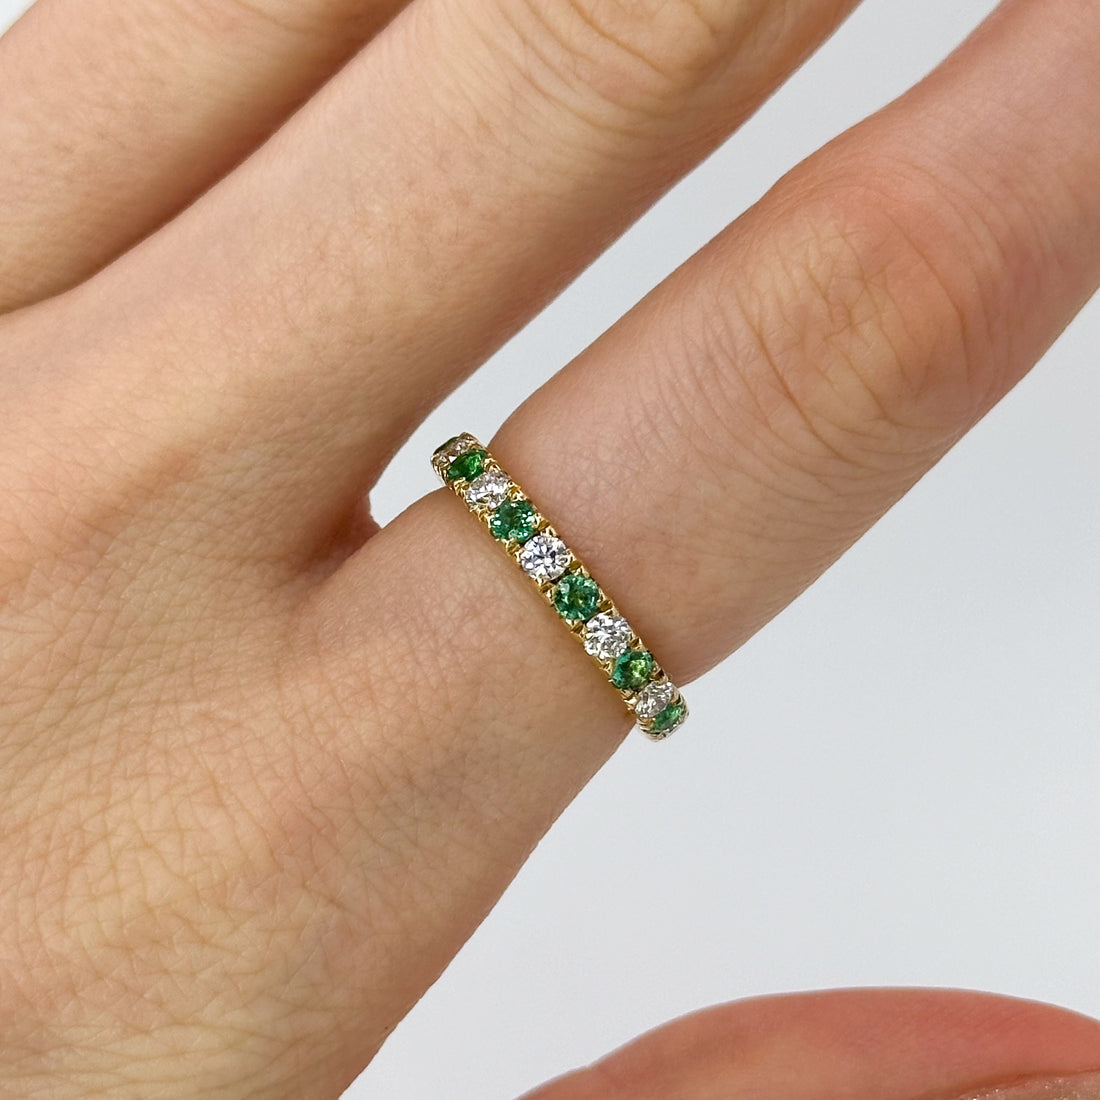 Diamond and Emerald Eternity Ring in Yellow Gold